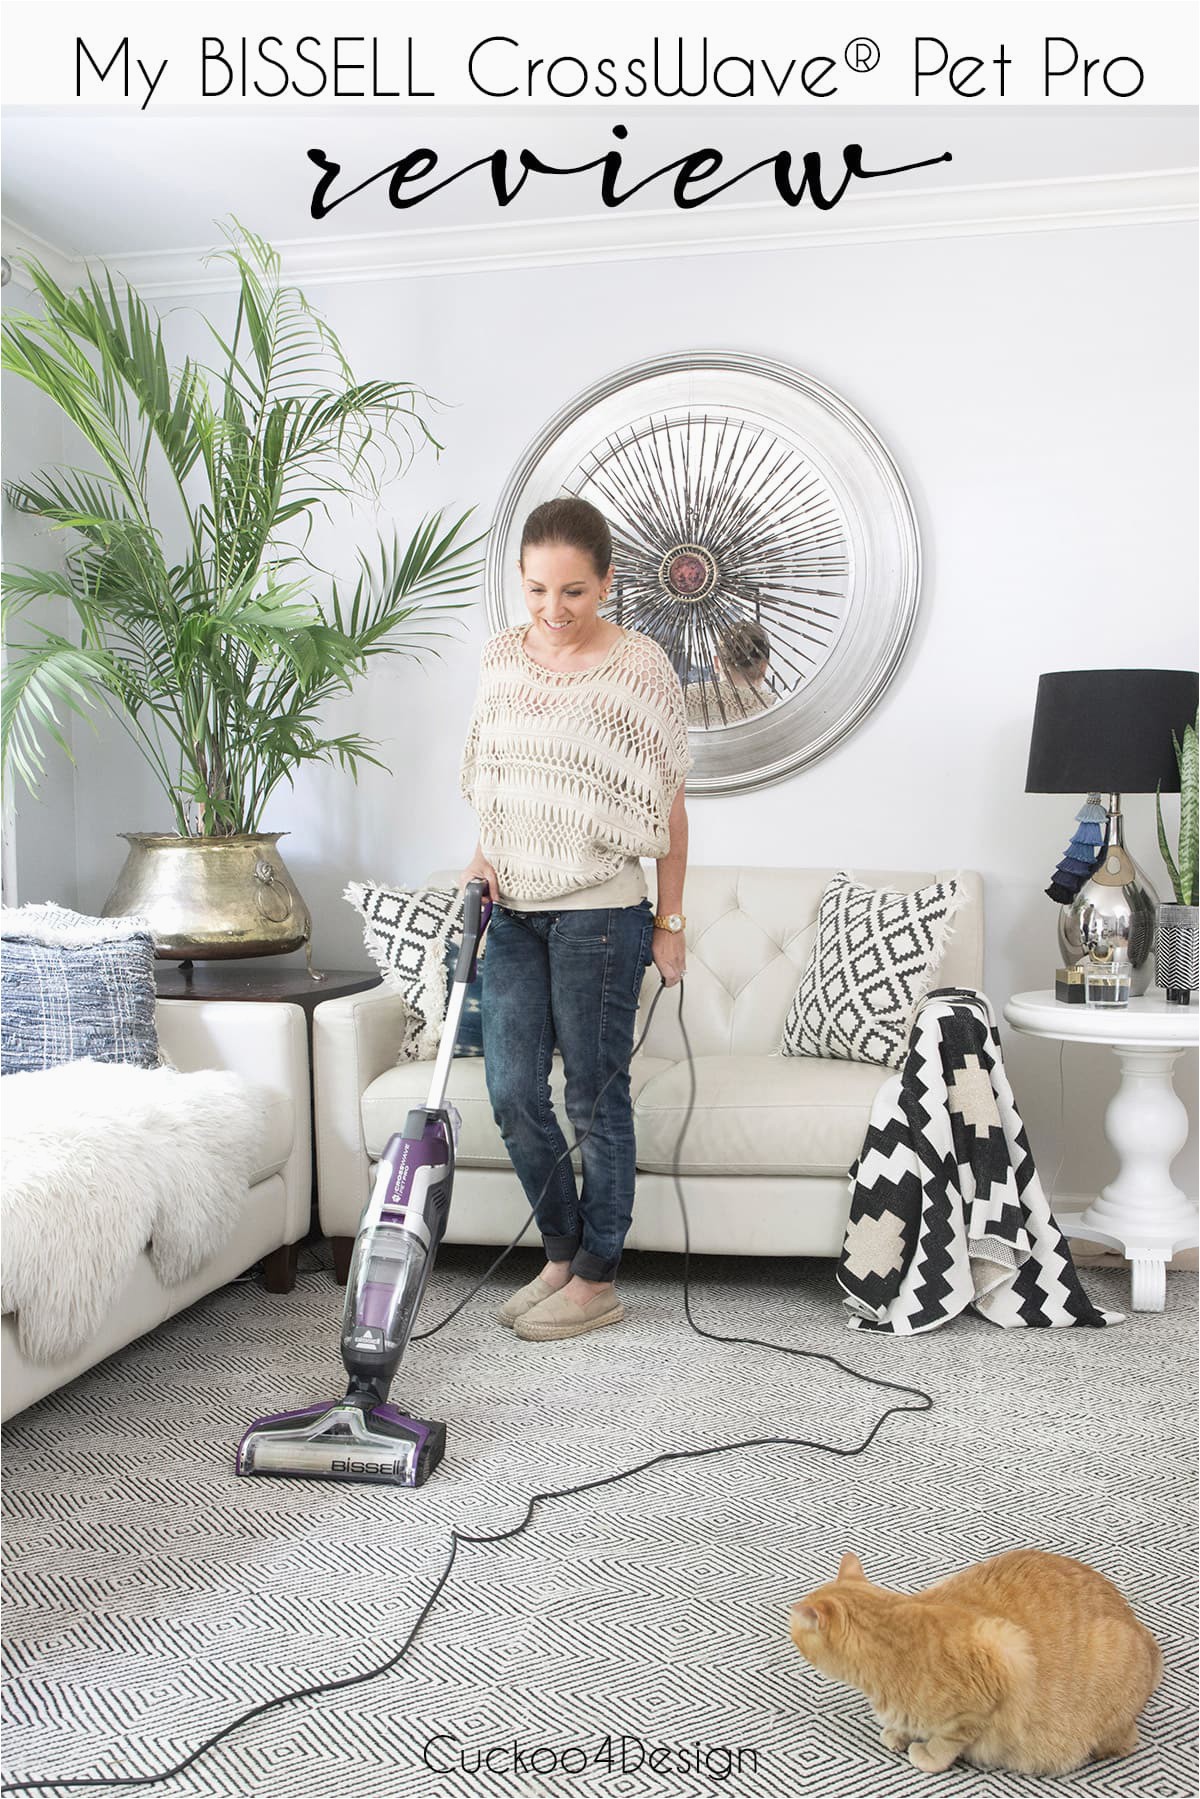 Bissell Crosswave area Rug Cleaner My Bissell Crosswave Pet Pro Review